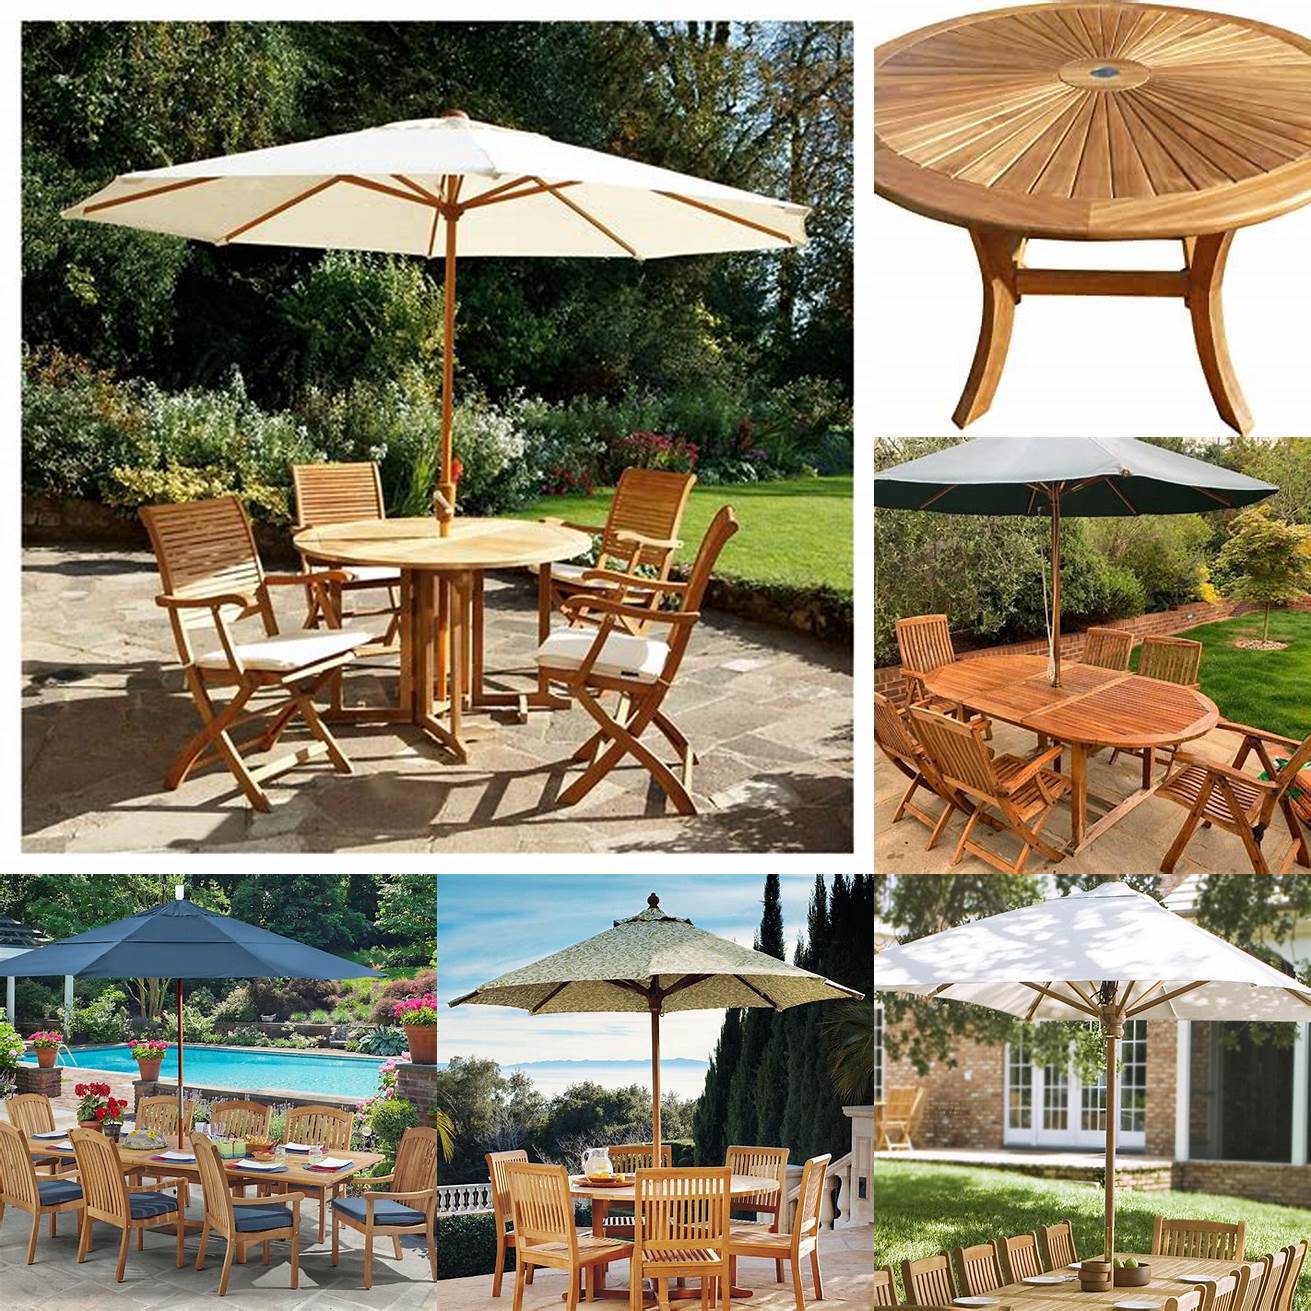 A teak outdoor table with a parasol